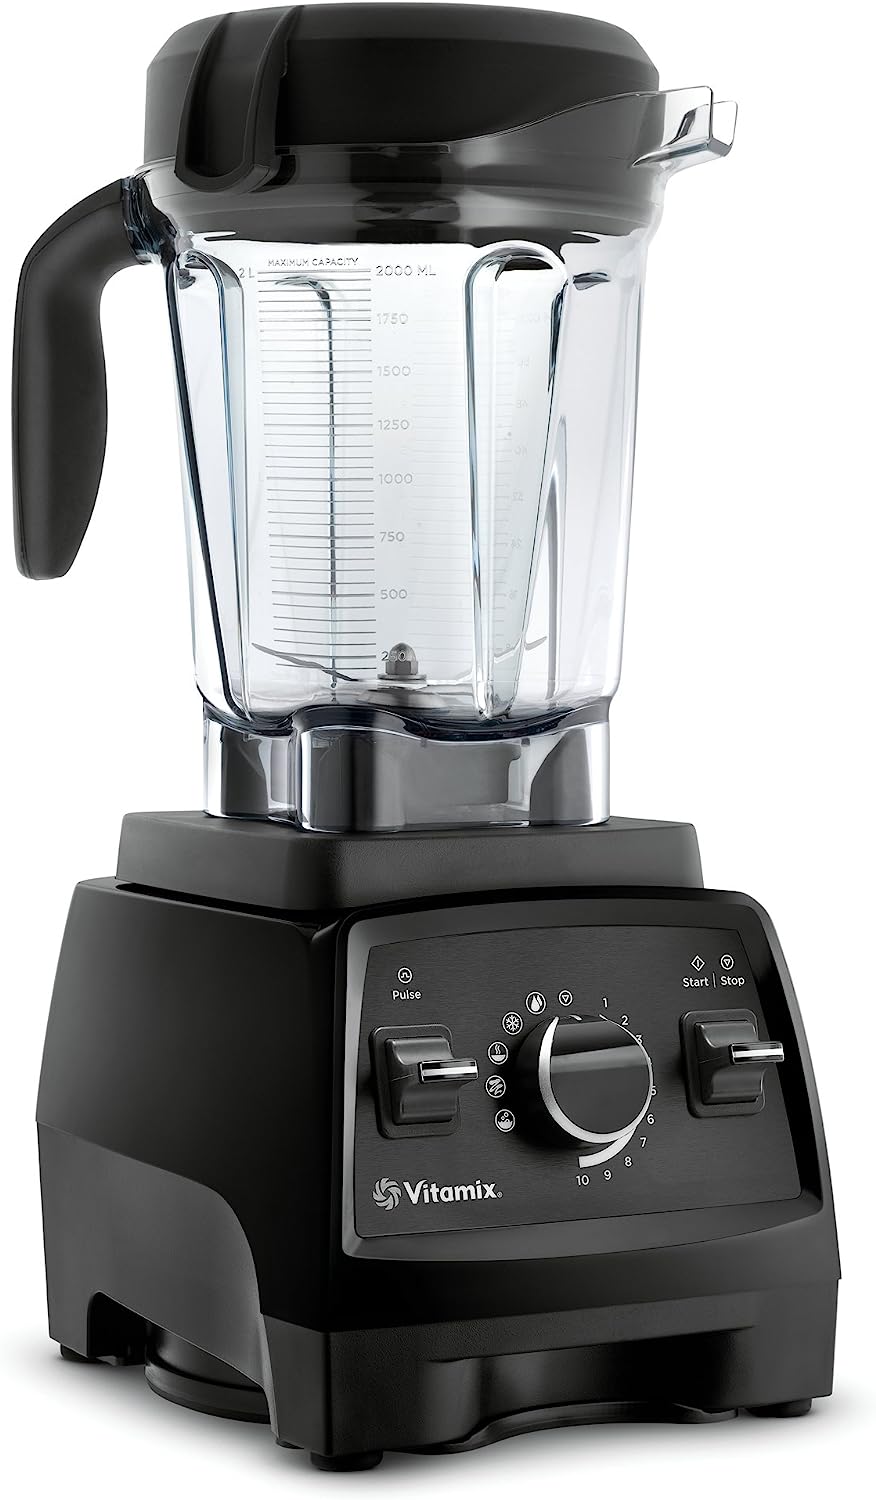 Vitamix Professional Series 750 Blender, Professional-Grade, 64 oz. Low-Profile Container, Black, Self-Cleaning - 1957 $399